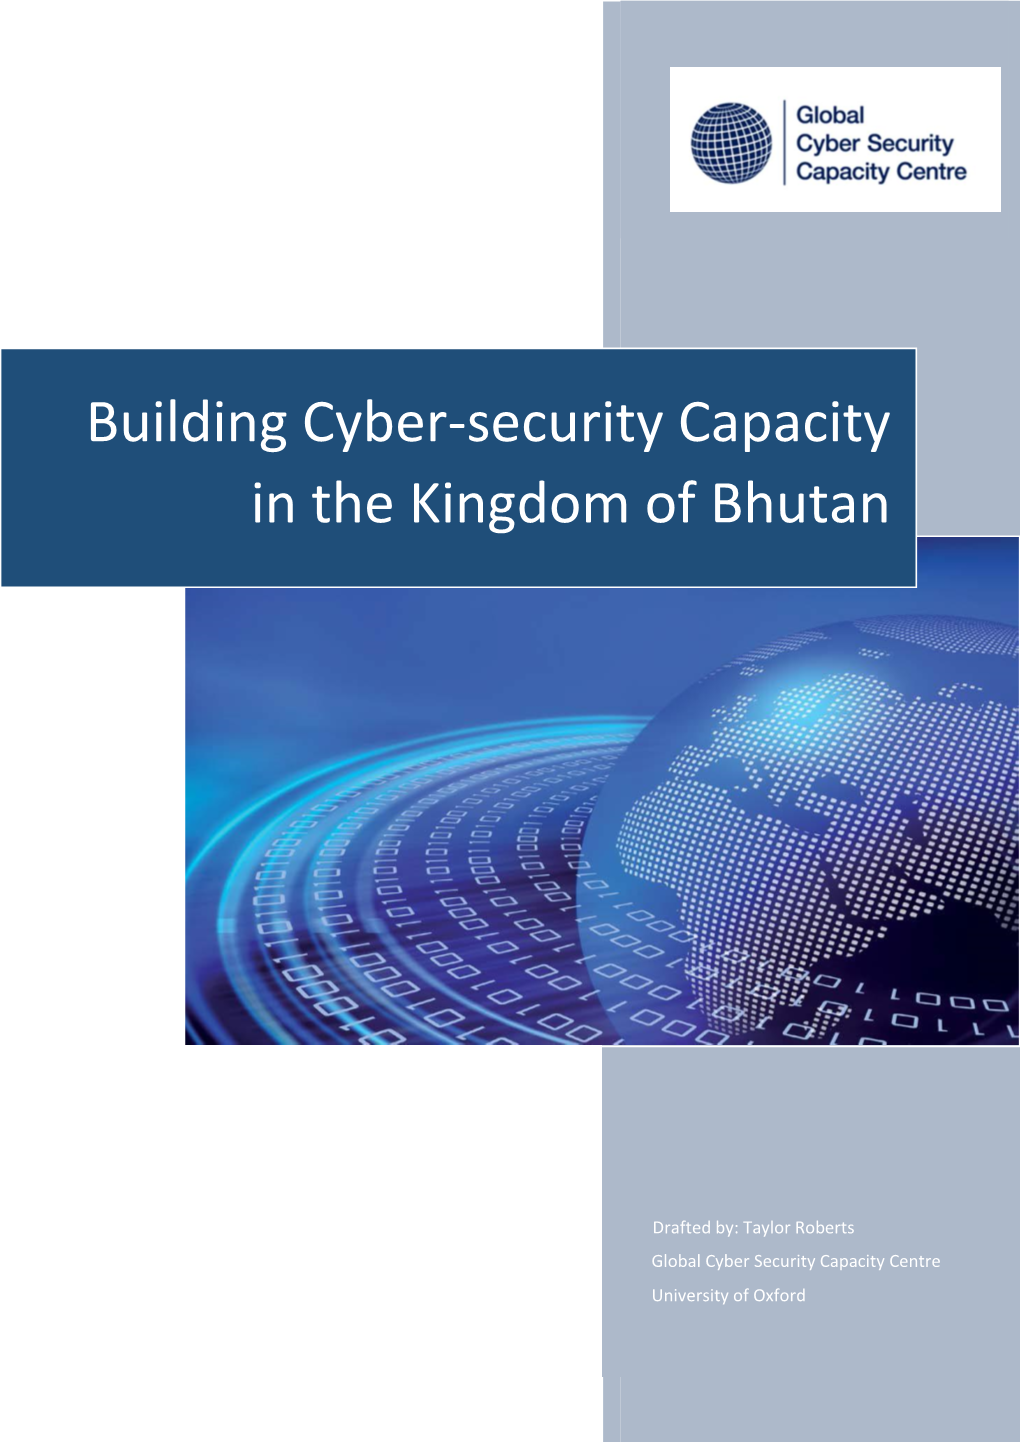 Building Cyber-Security Capacity in the Kingdom of Bhutan